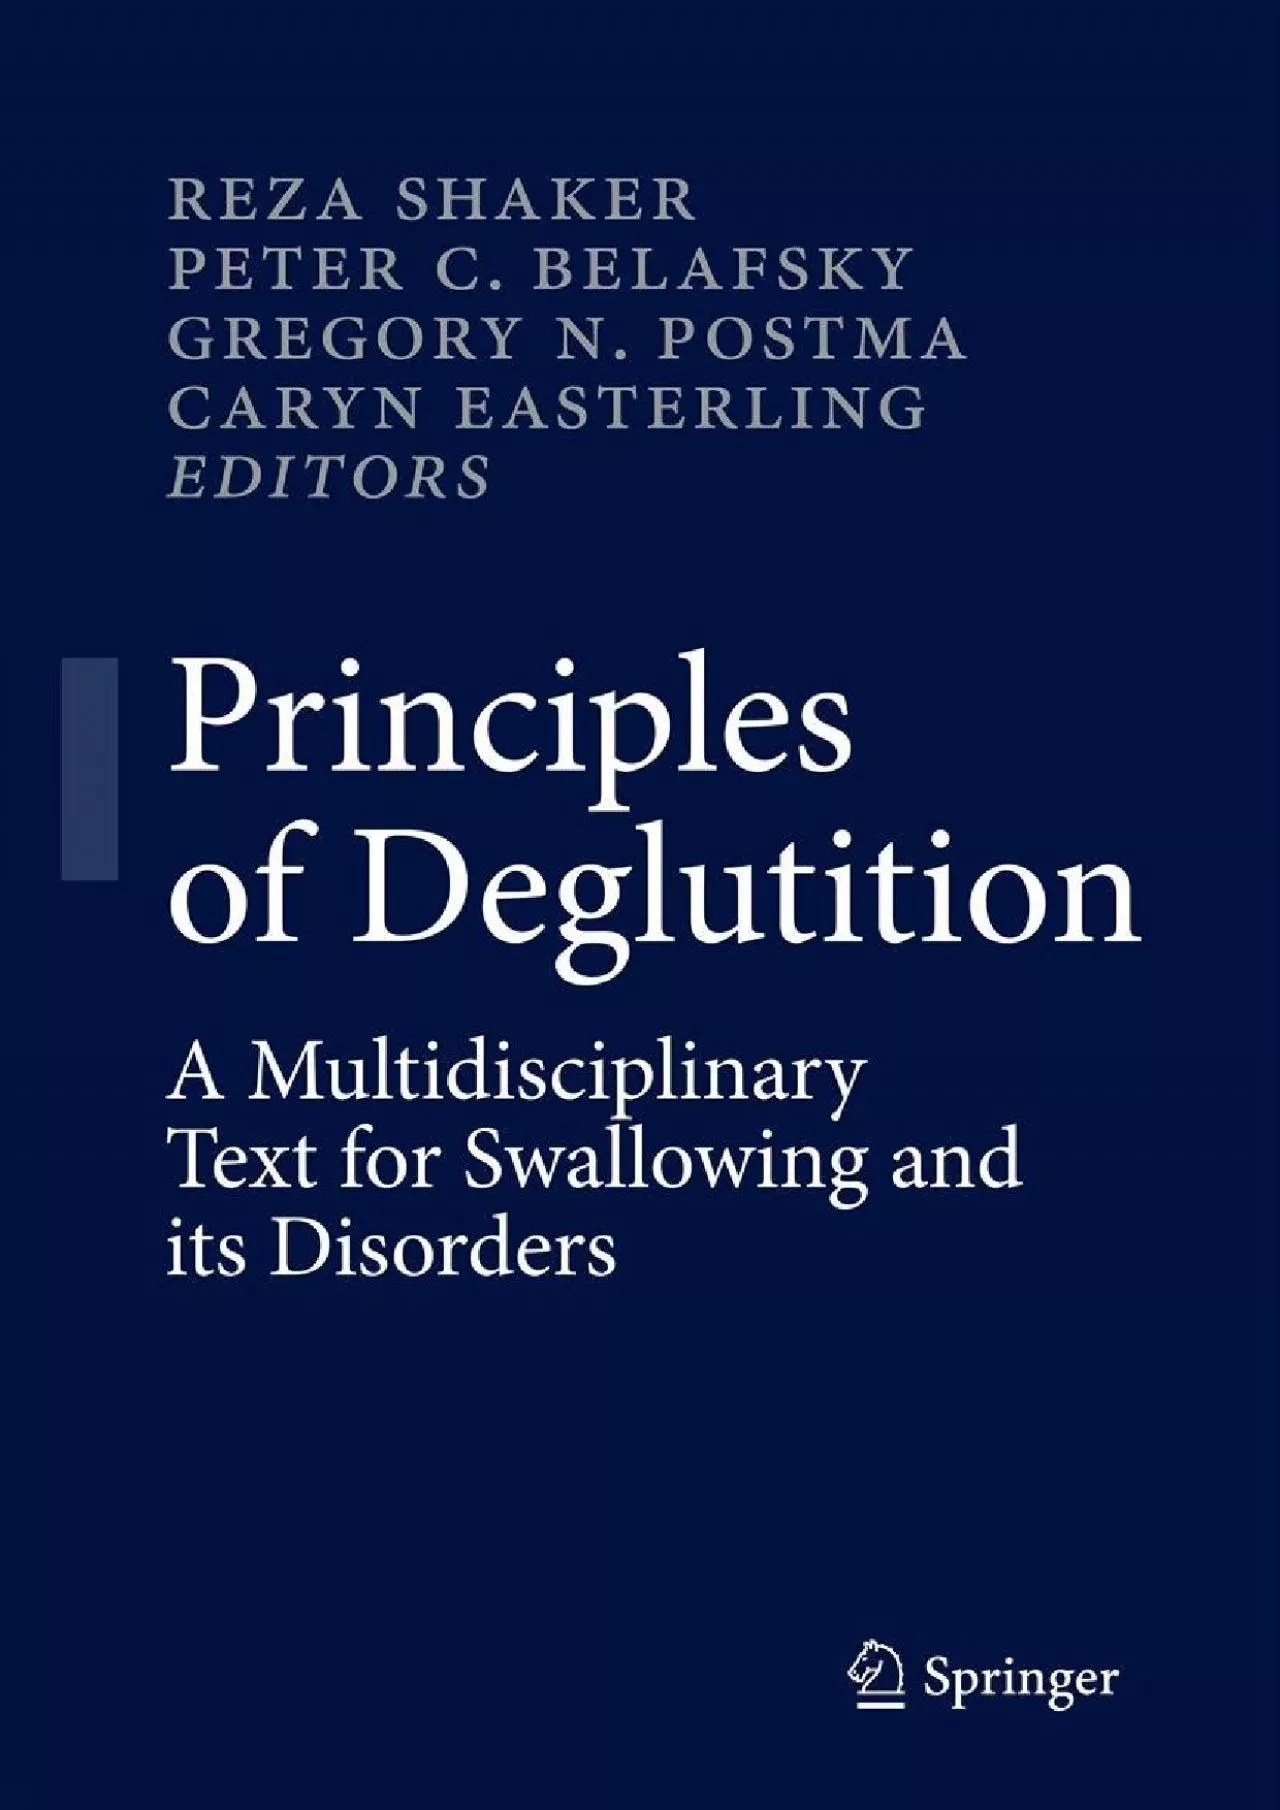 (EBOOK)-Principles of Deglutition: A Multidisciplinary Text for Swallowing and its Disorders